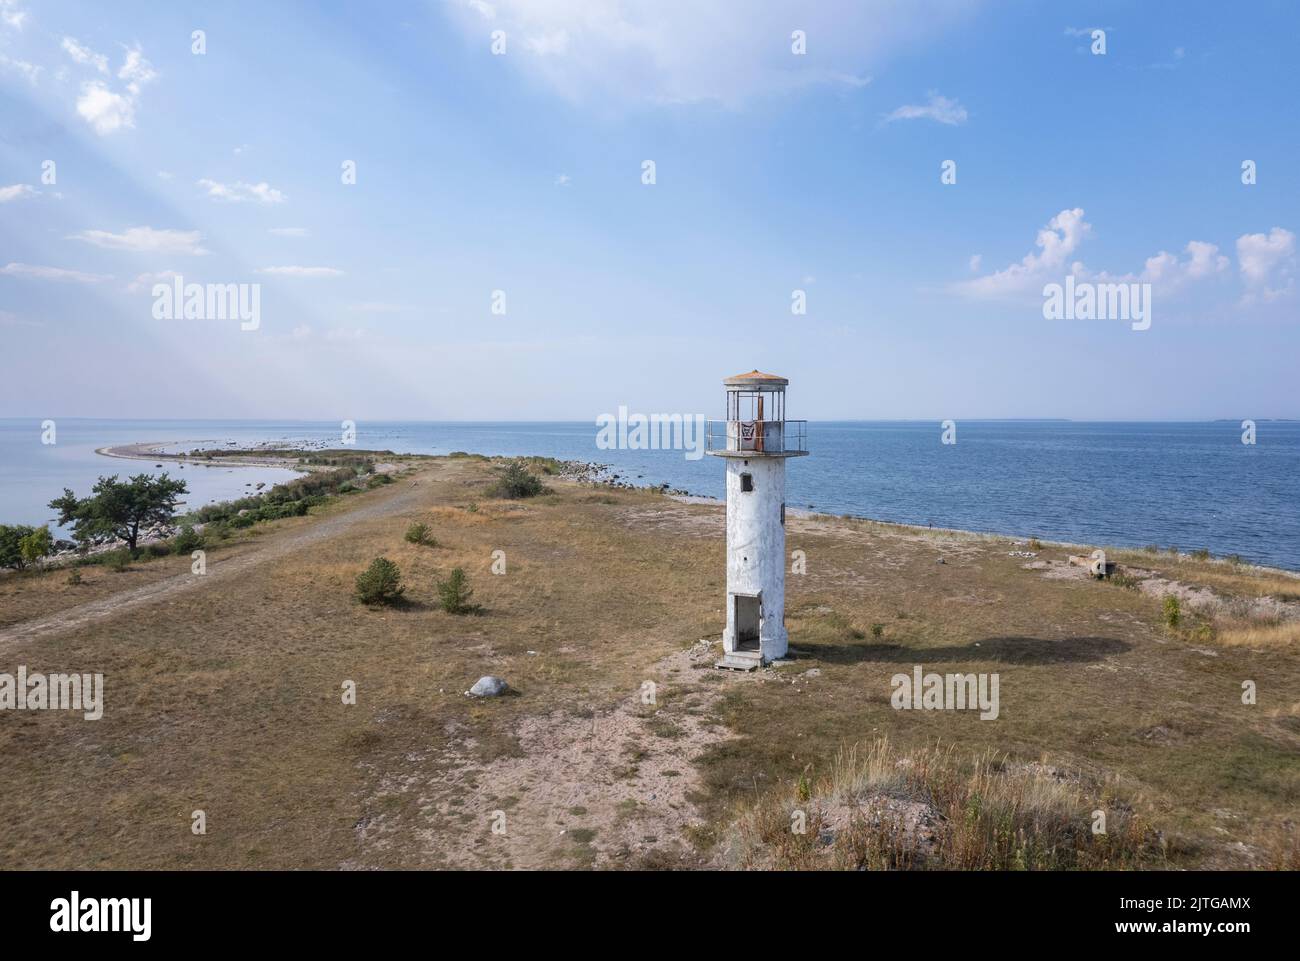 Coastline and an old lighthouse in northern Estonia Stock Photo